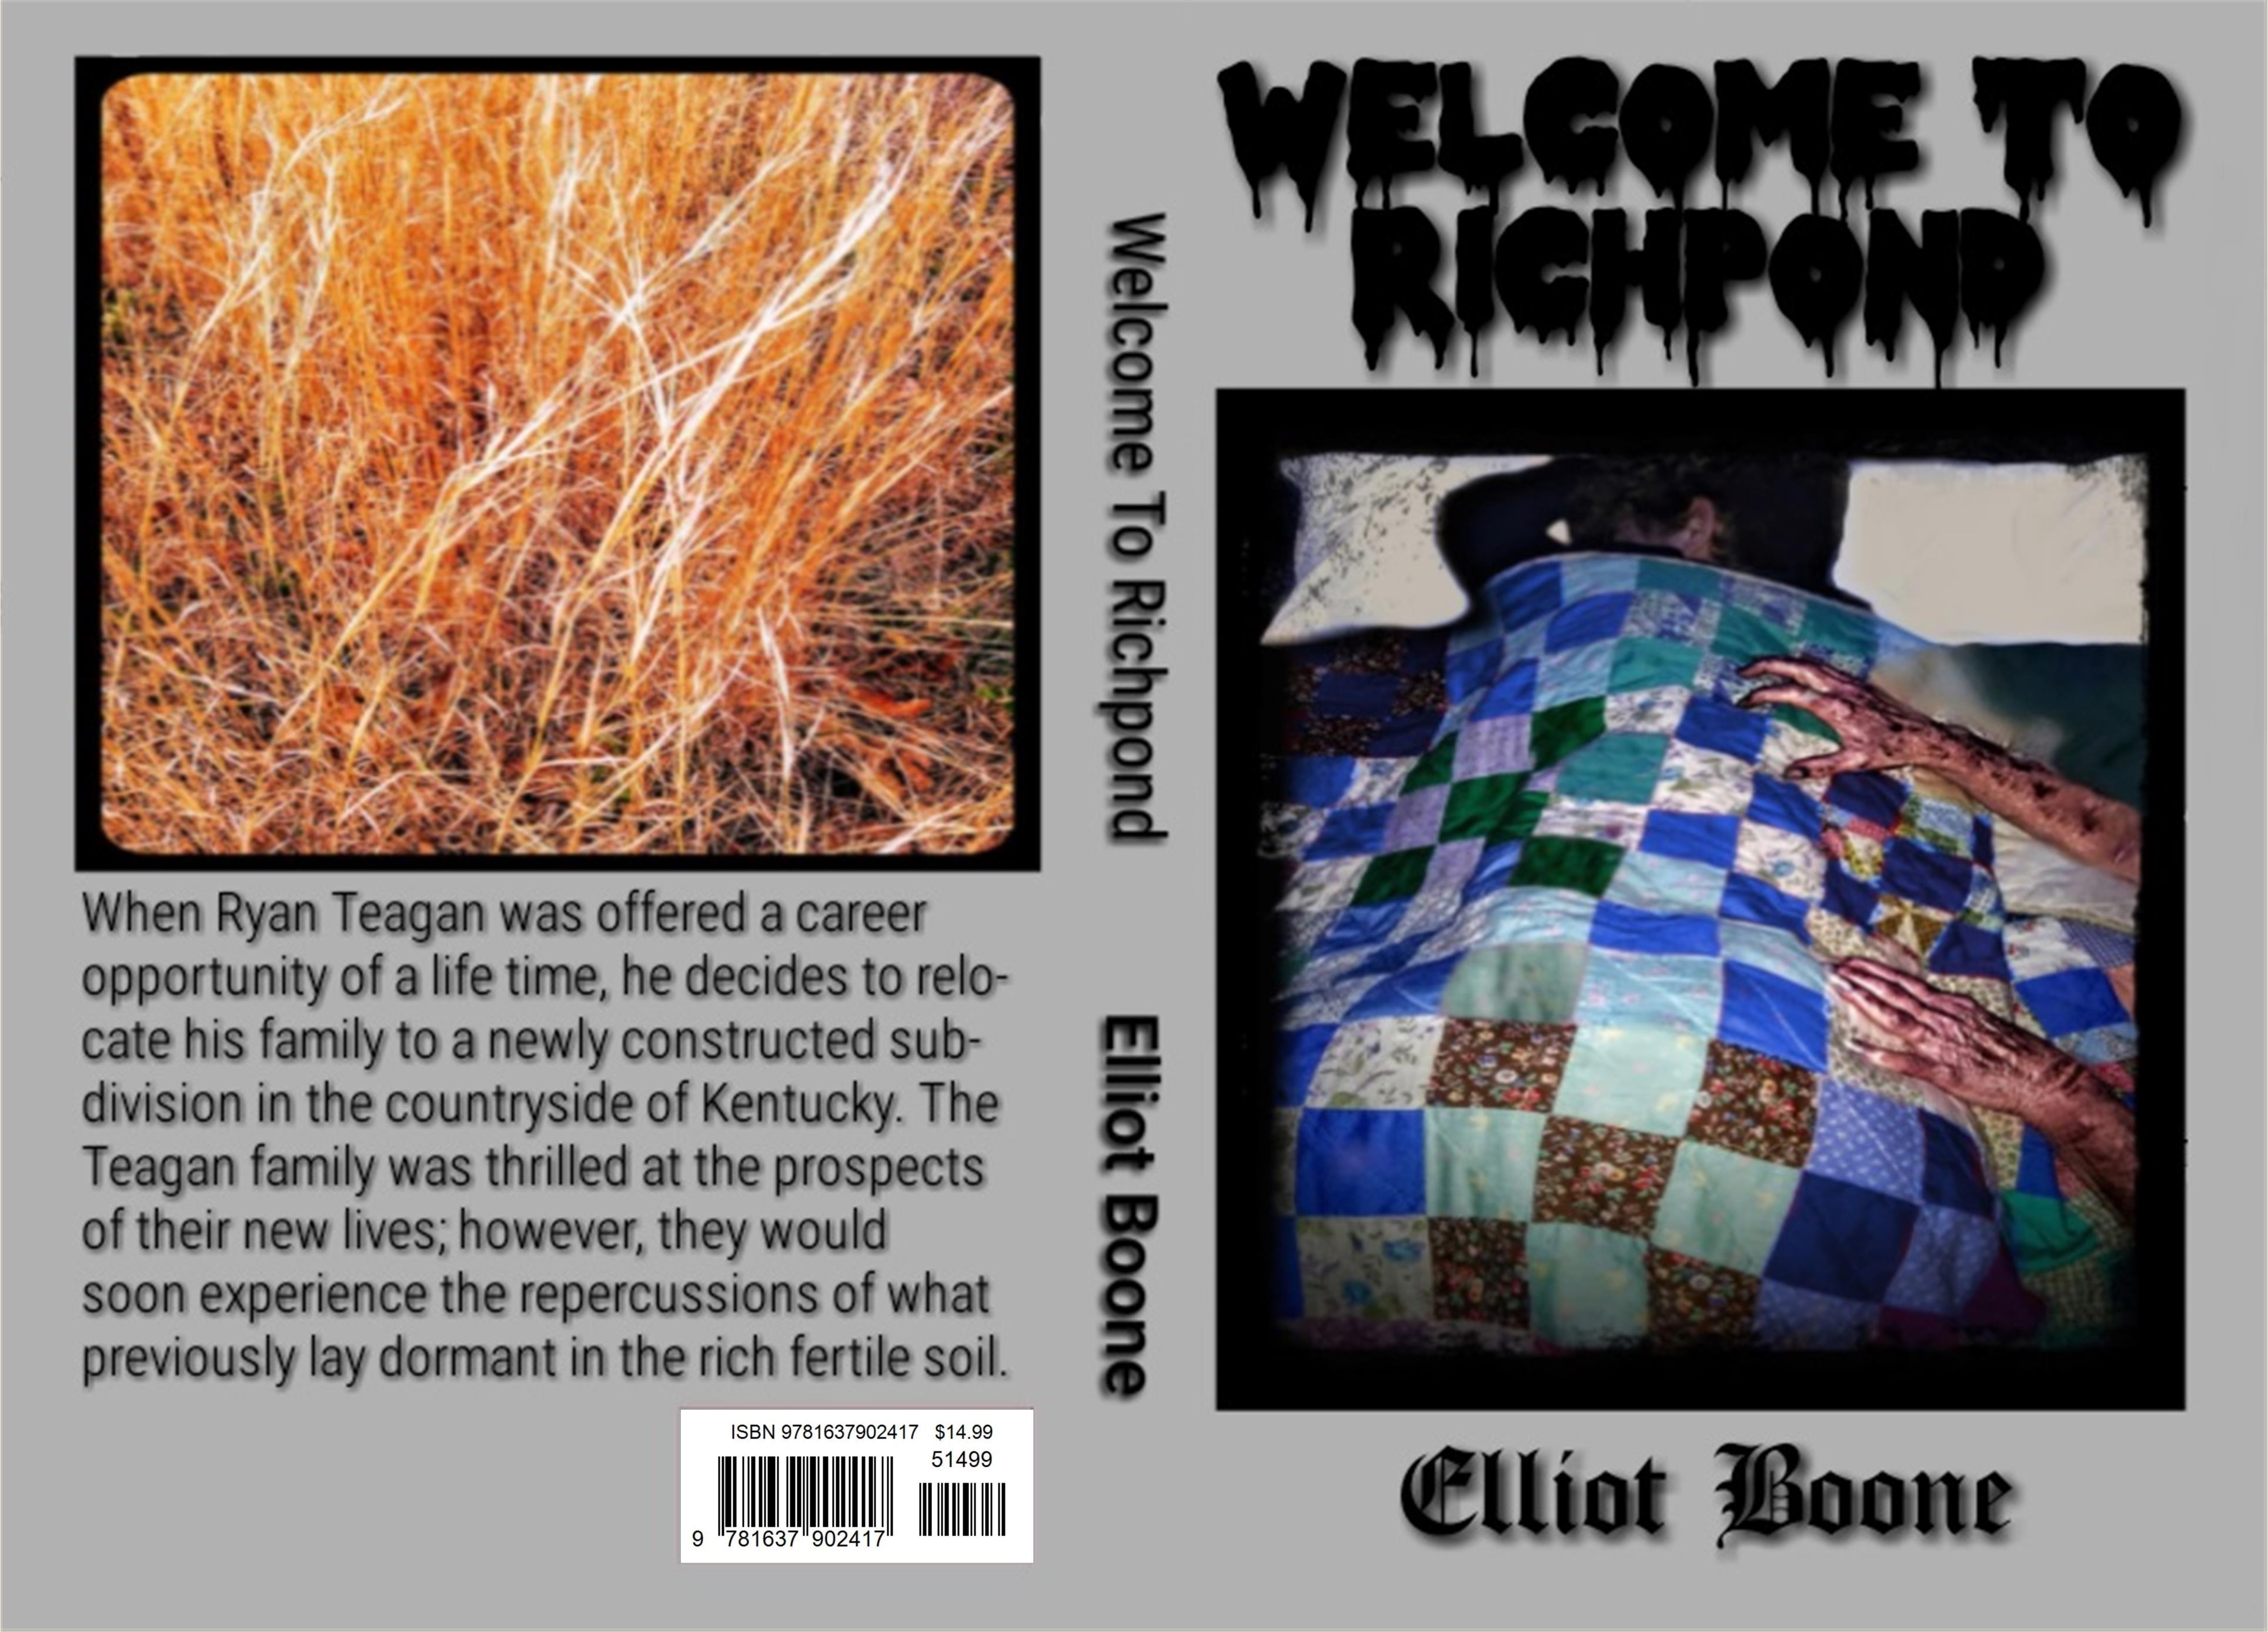 Welcome To Richpond cover image